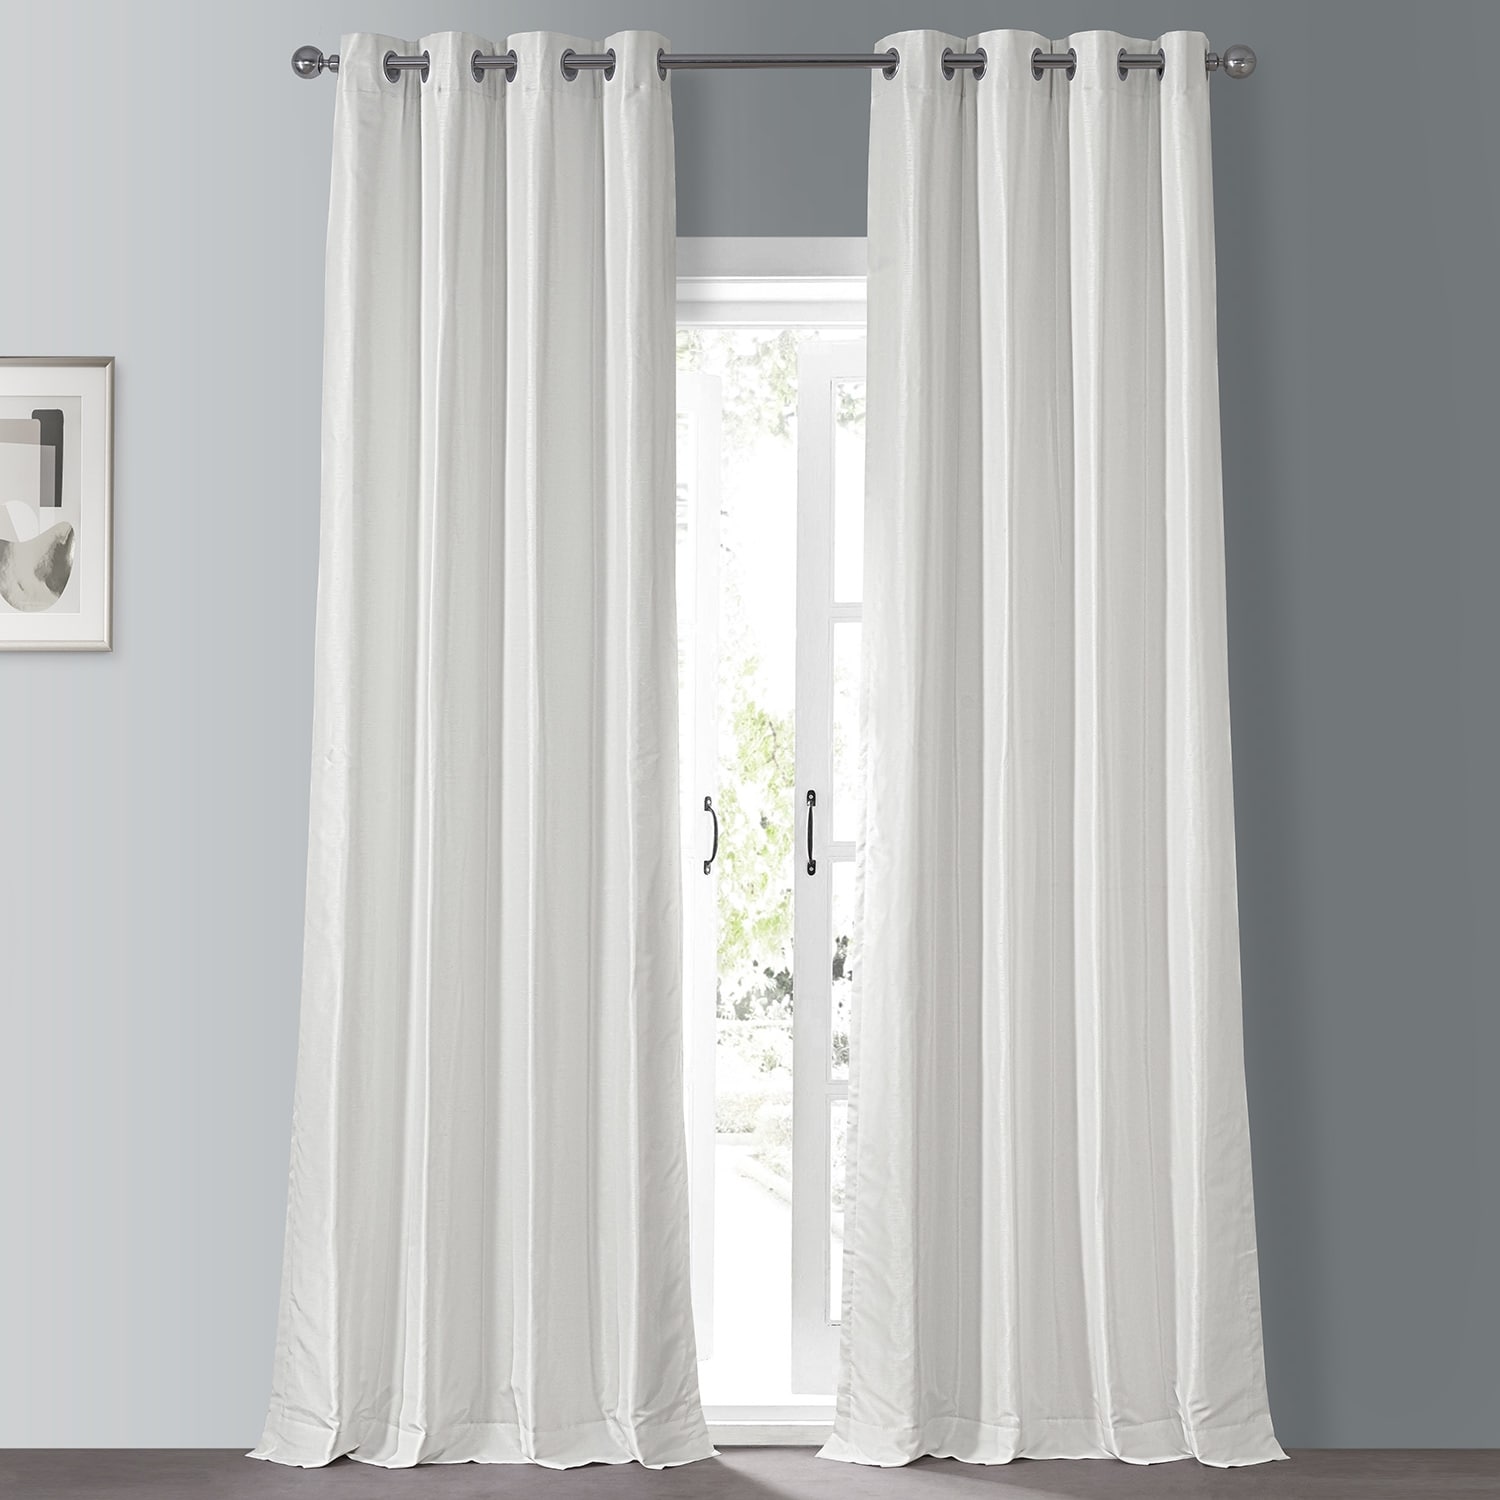 Ivory or White Faux Silk Dupion Curtains Eyelet Top High quality products 